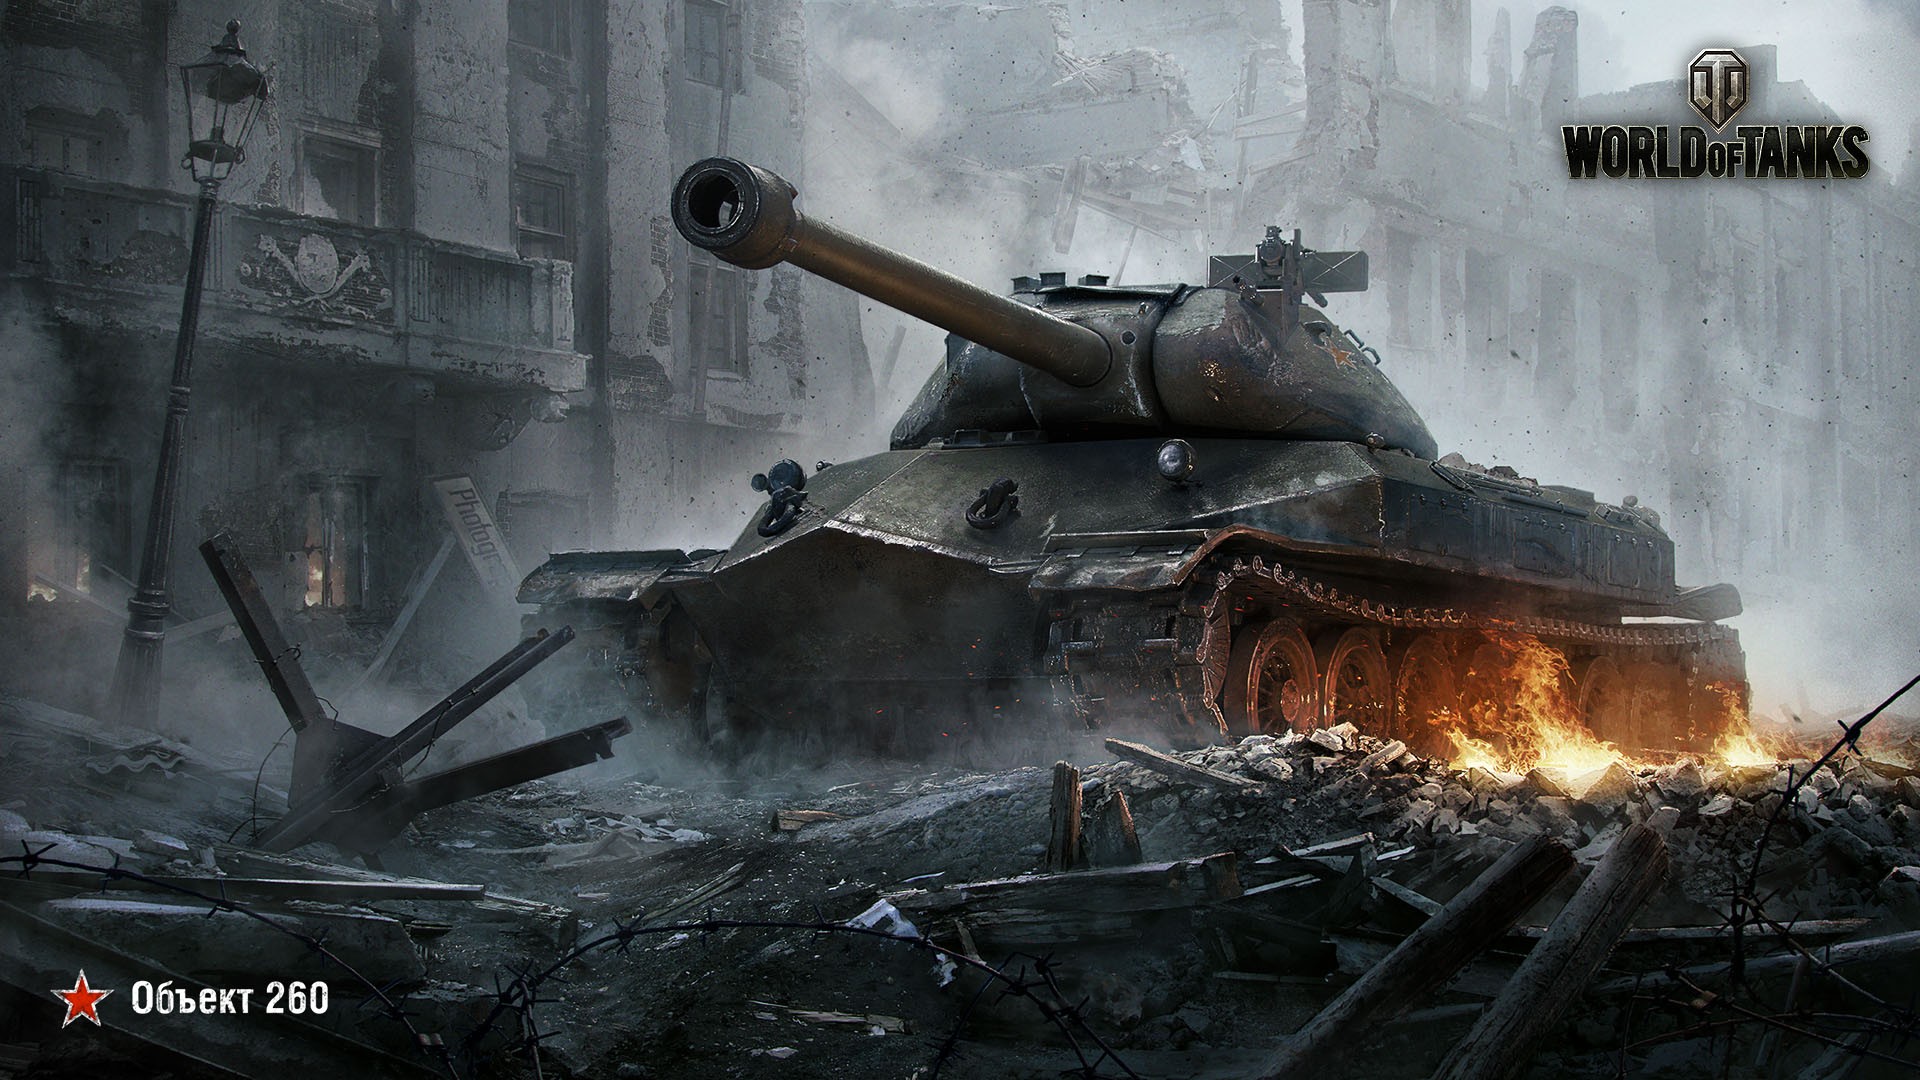 Free photo Object 260 from the game World of Tanks